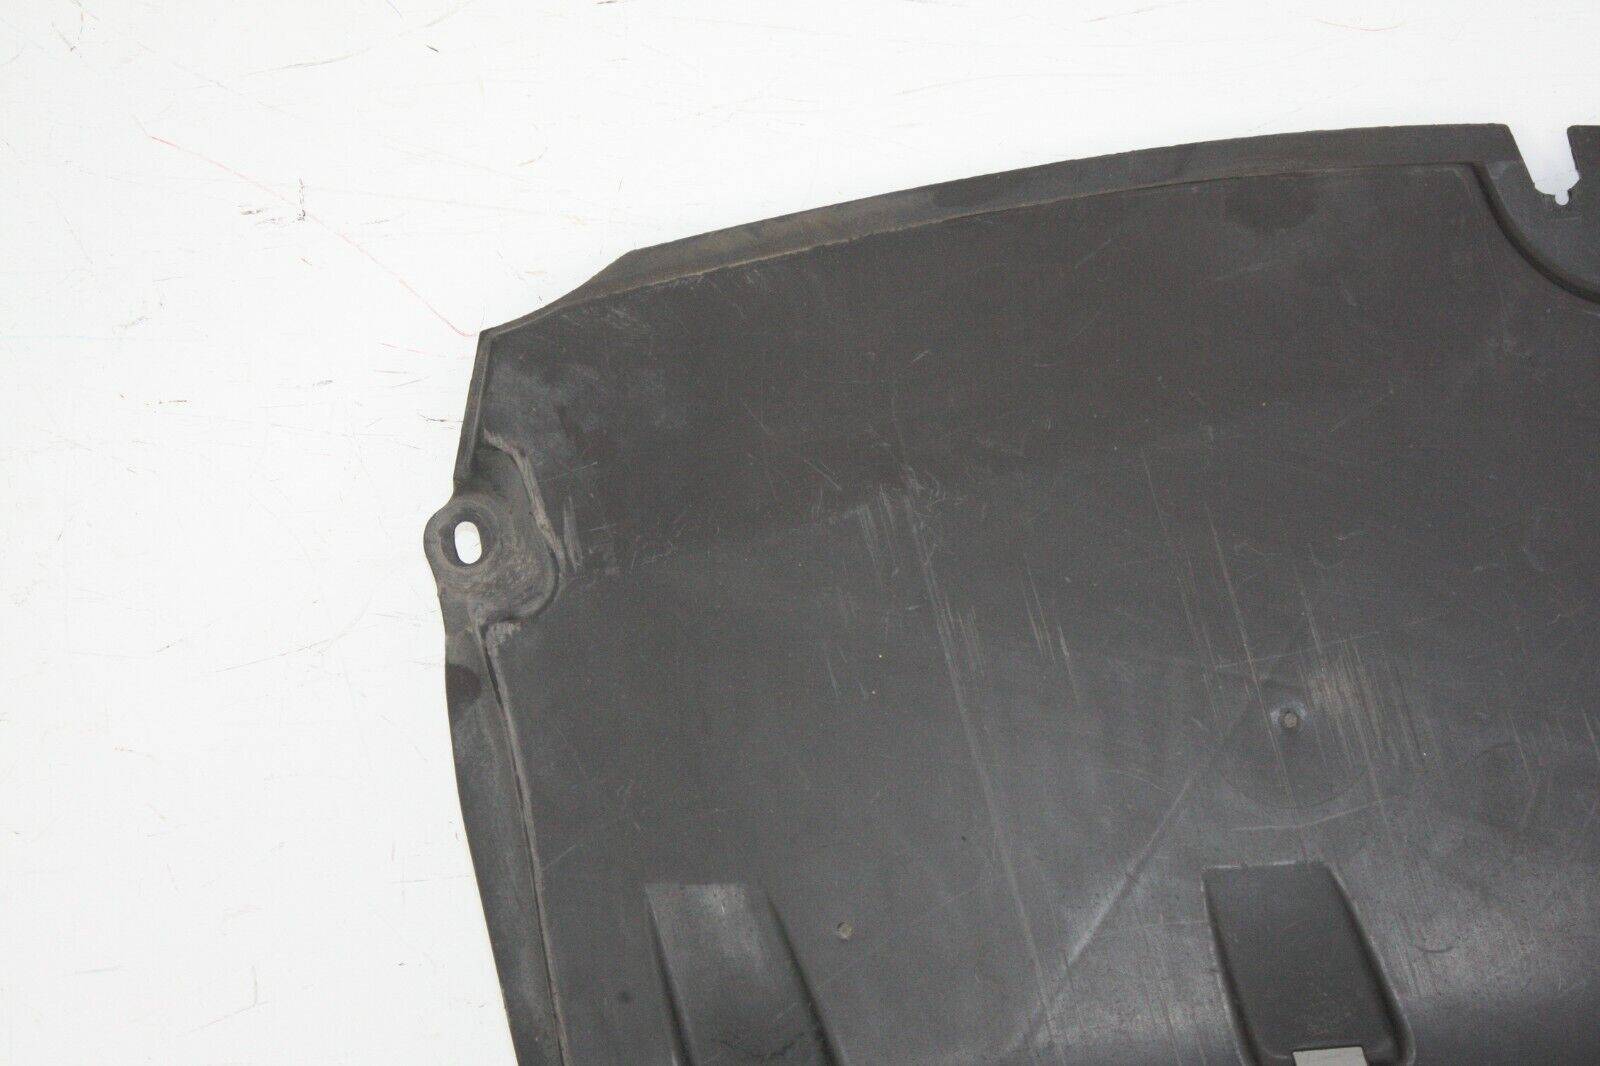 Audi-A4-Rear-Right-Underbody-Tray-Cover-2015-TO-2018-8W0825219A-175367535392-2